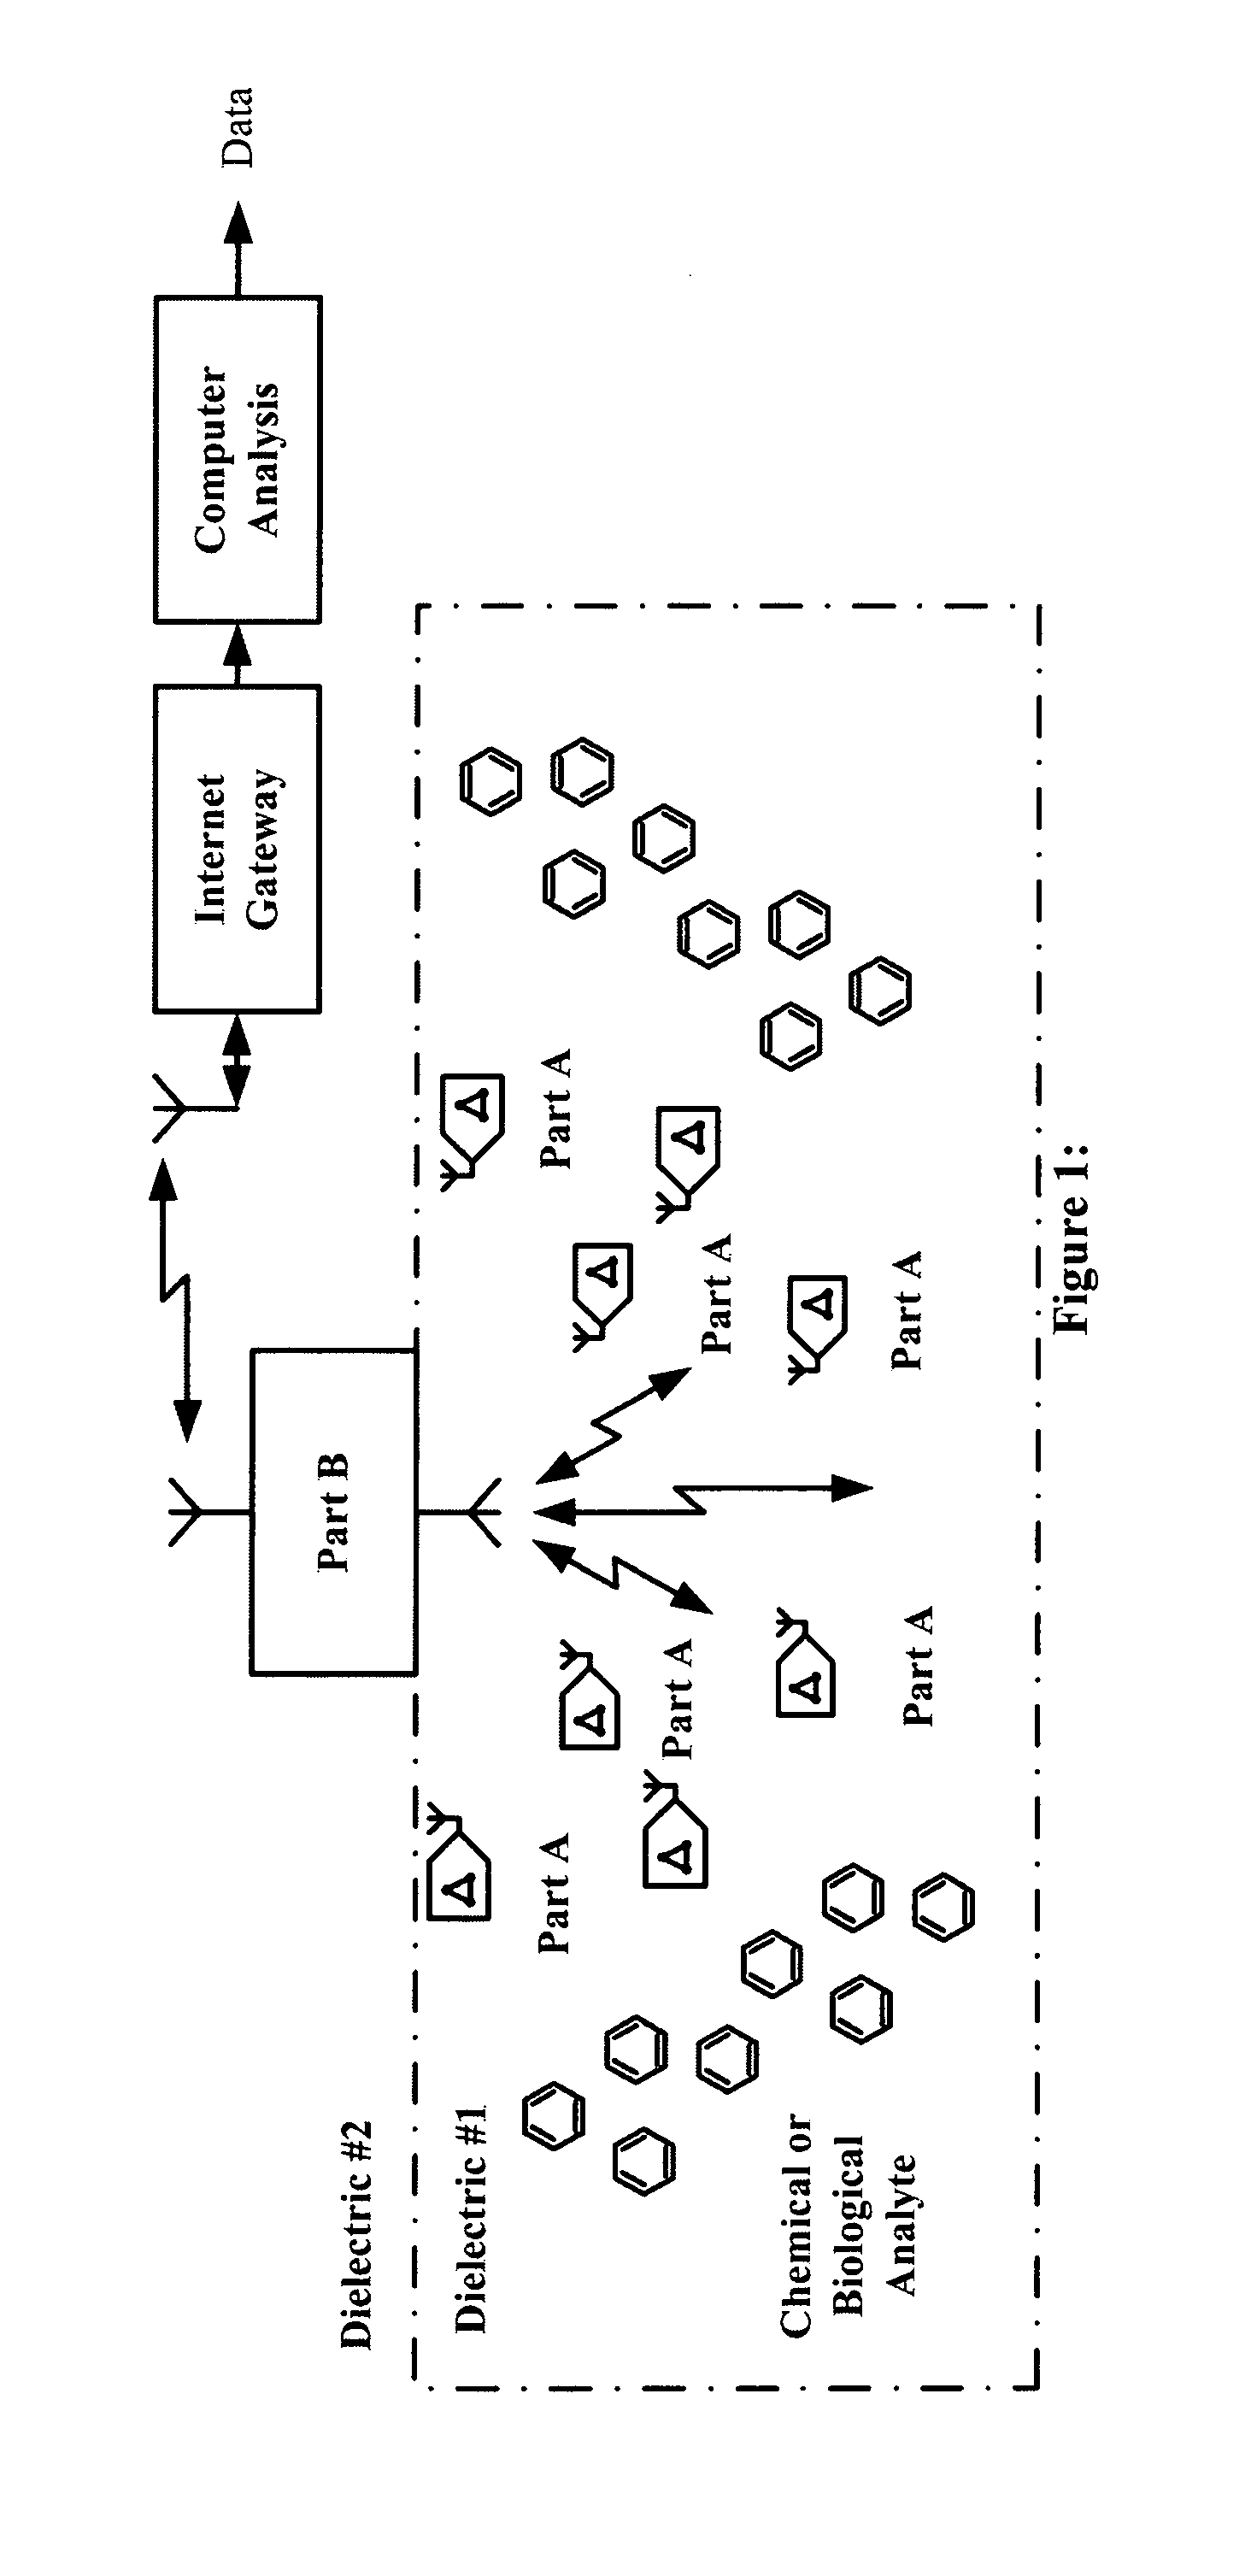 Apparatus, Method and System for Distributed Chemical or Biological to Digital Conversion to Digital Information Using Radio Frequencies